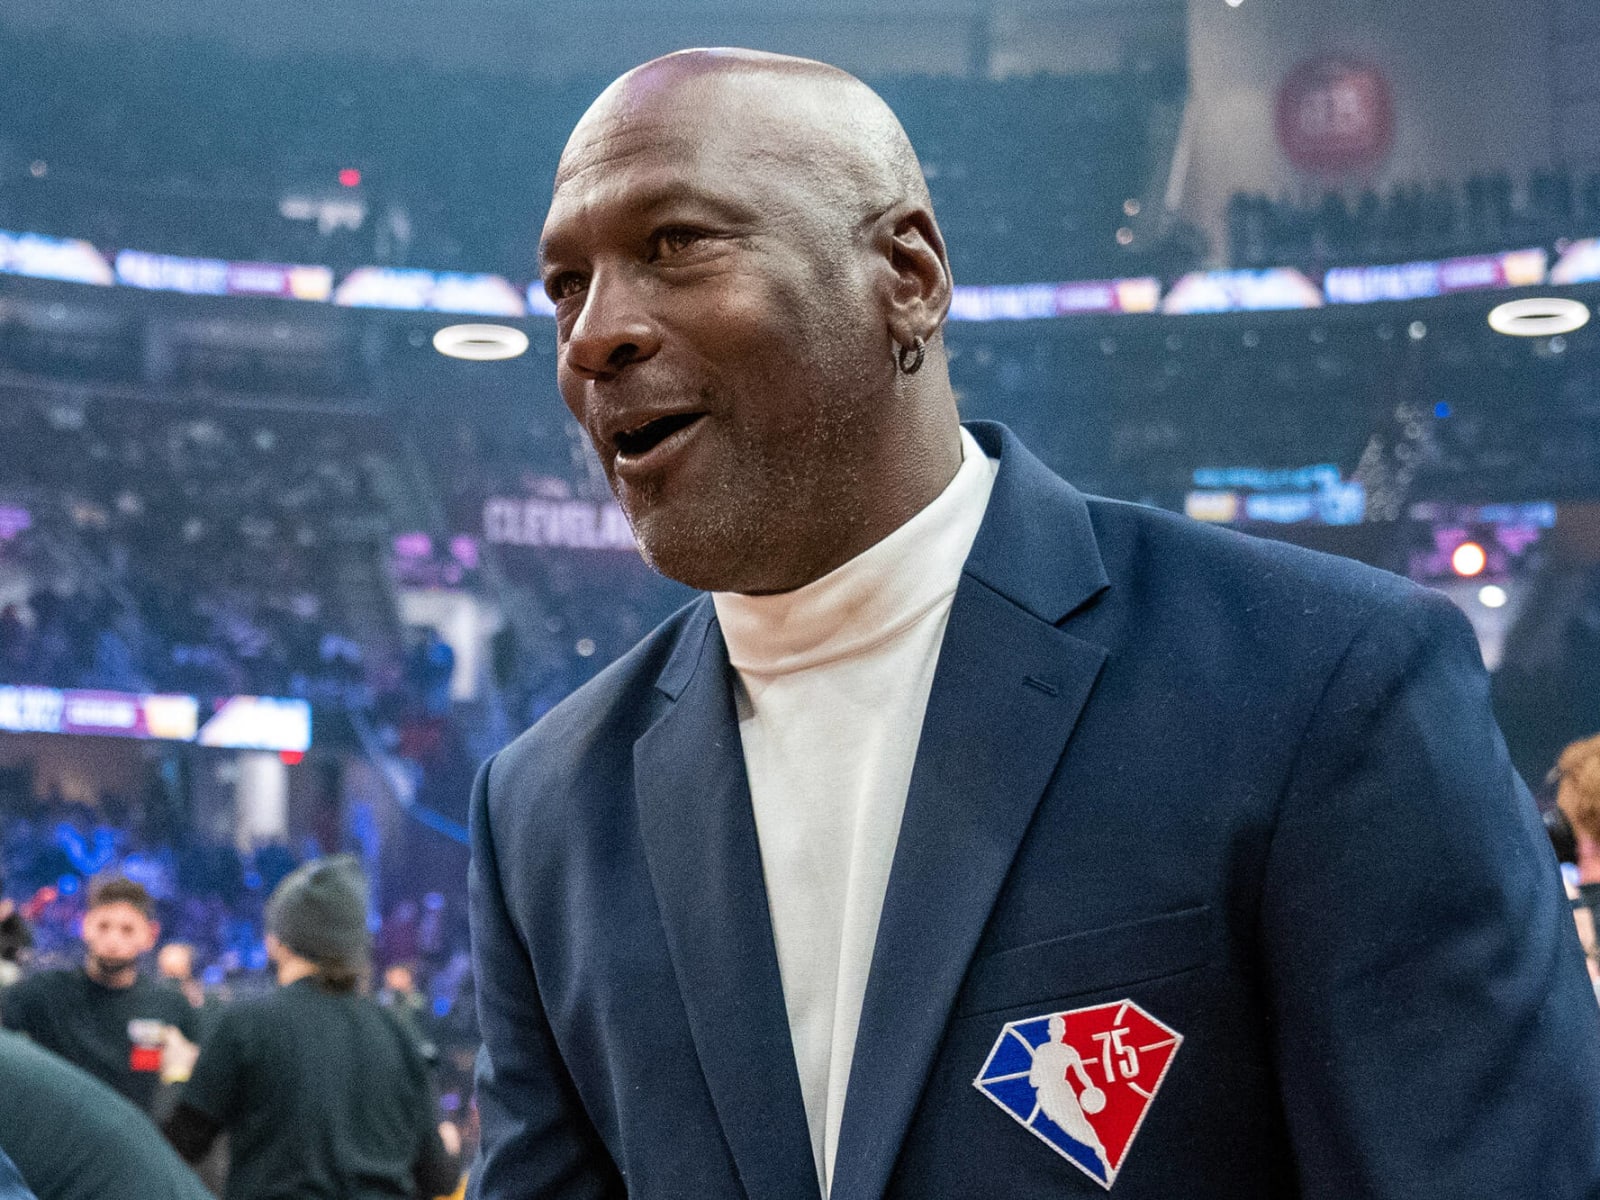 Charlotte Hornets: Michael Jordan had colorful words for BJ Armstrong